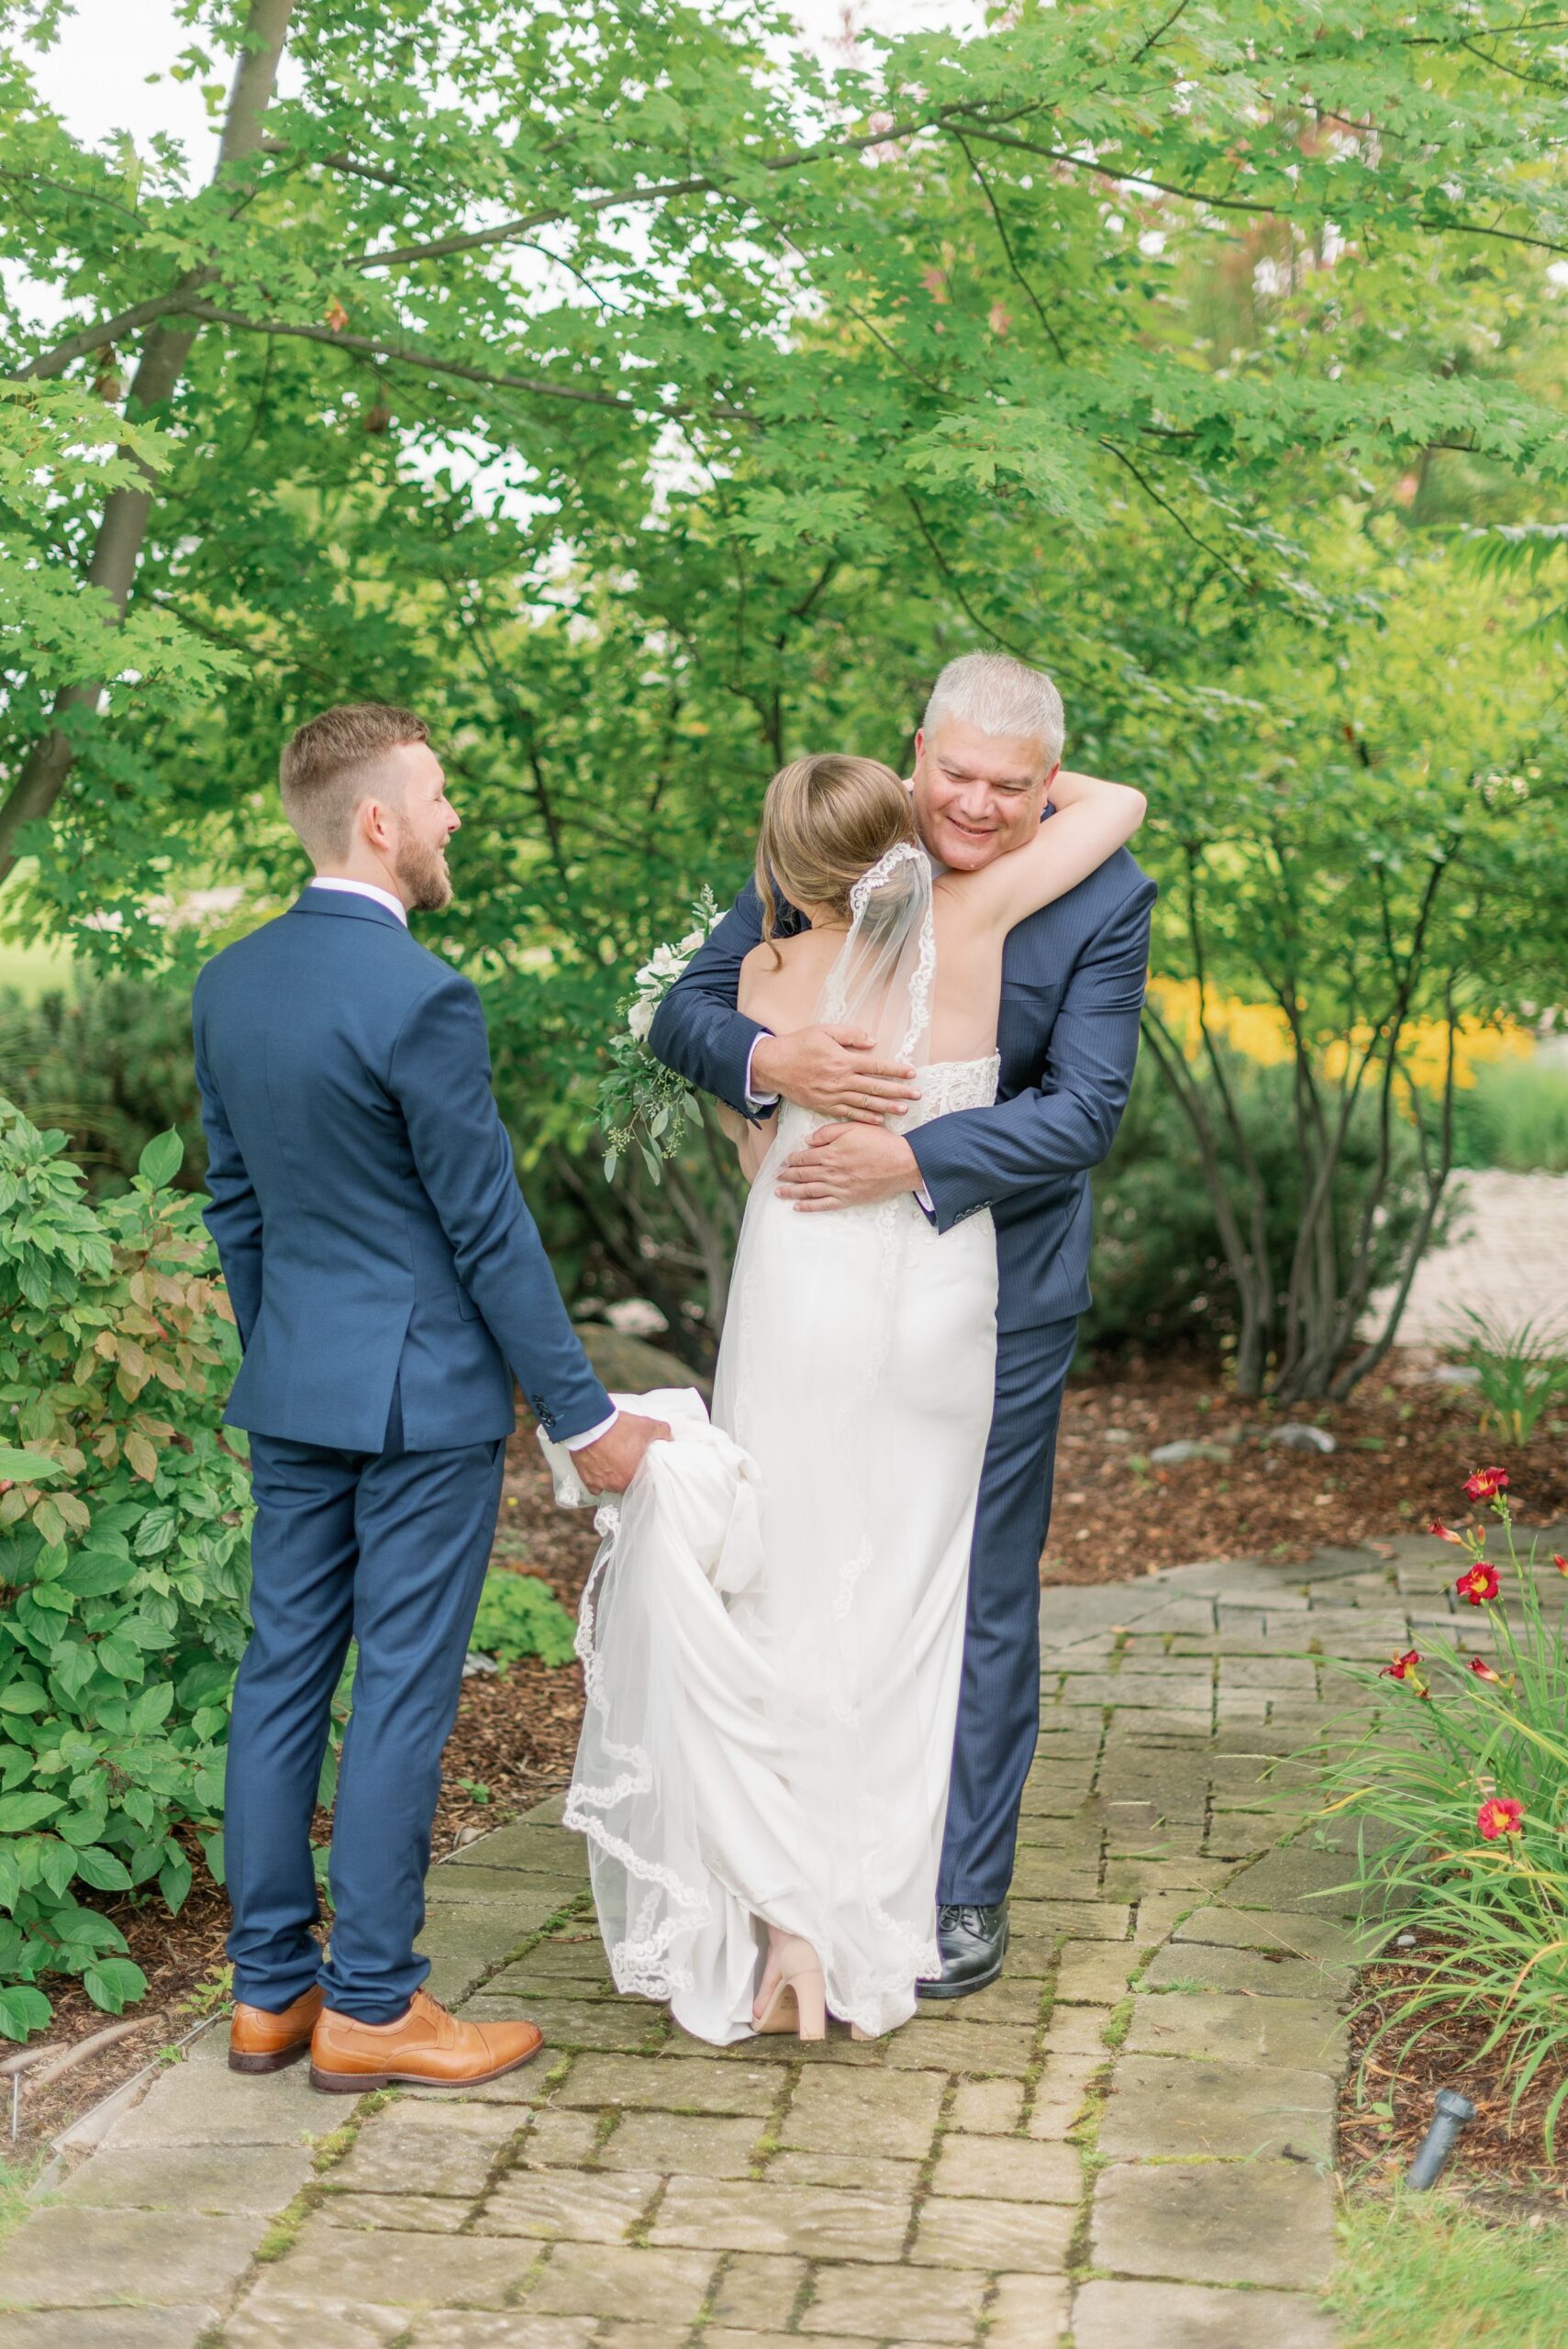 Bride hugging father at Barrie, Ontario wedding. Photographed by Maranda Elysse.